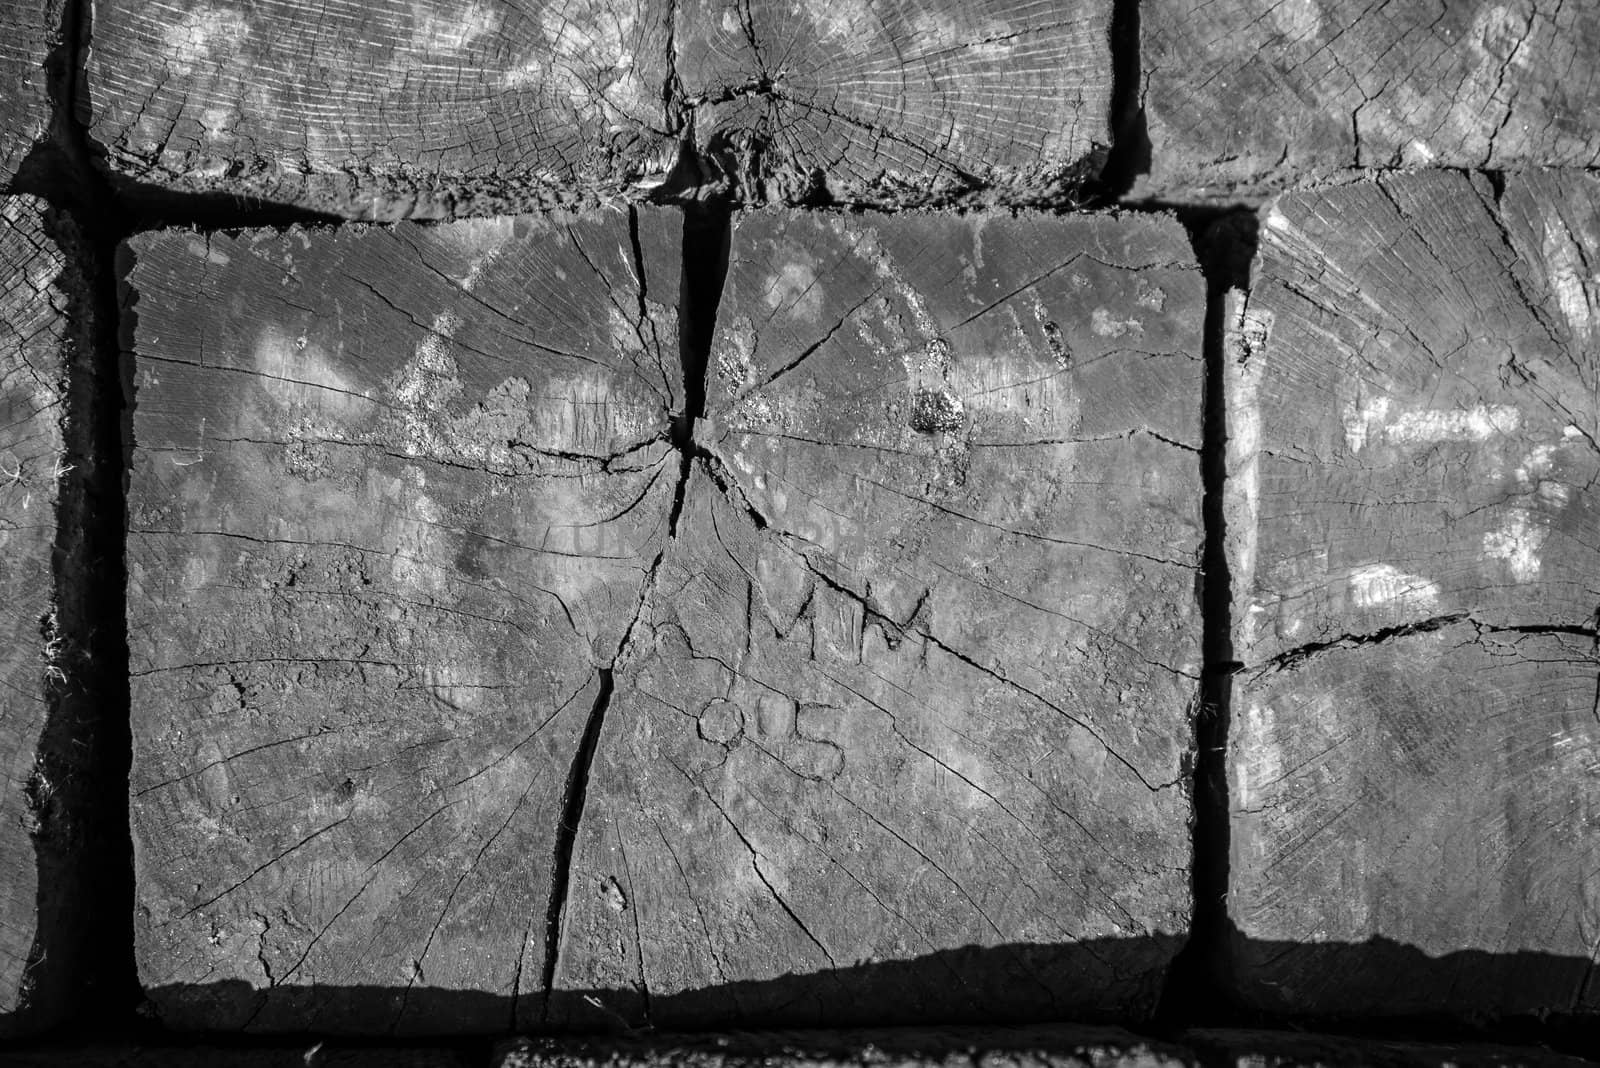 Engraved Railroad Tie in Black and White by wolterk